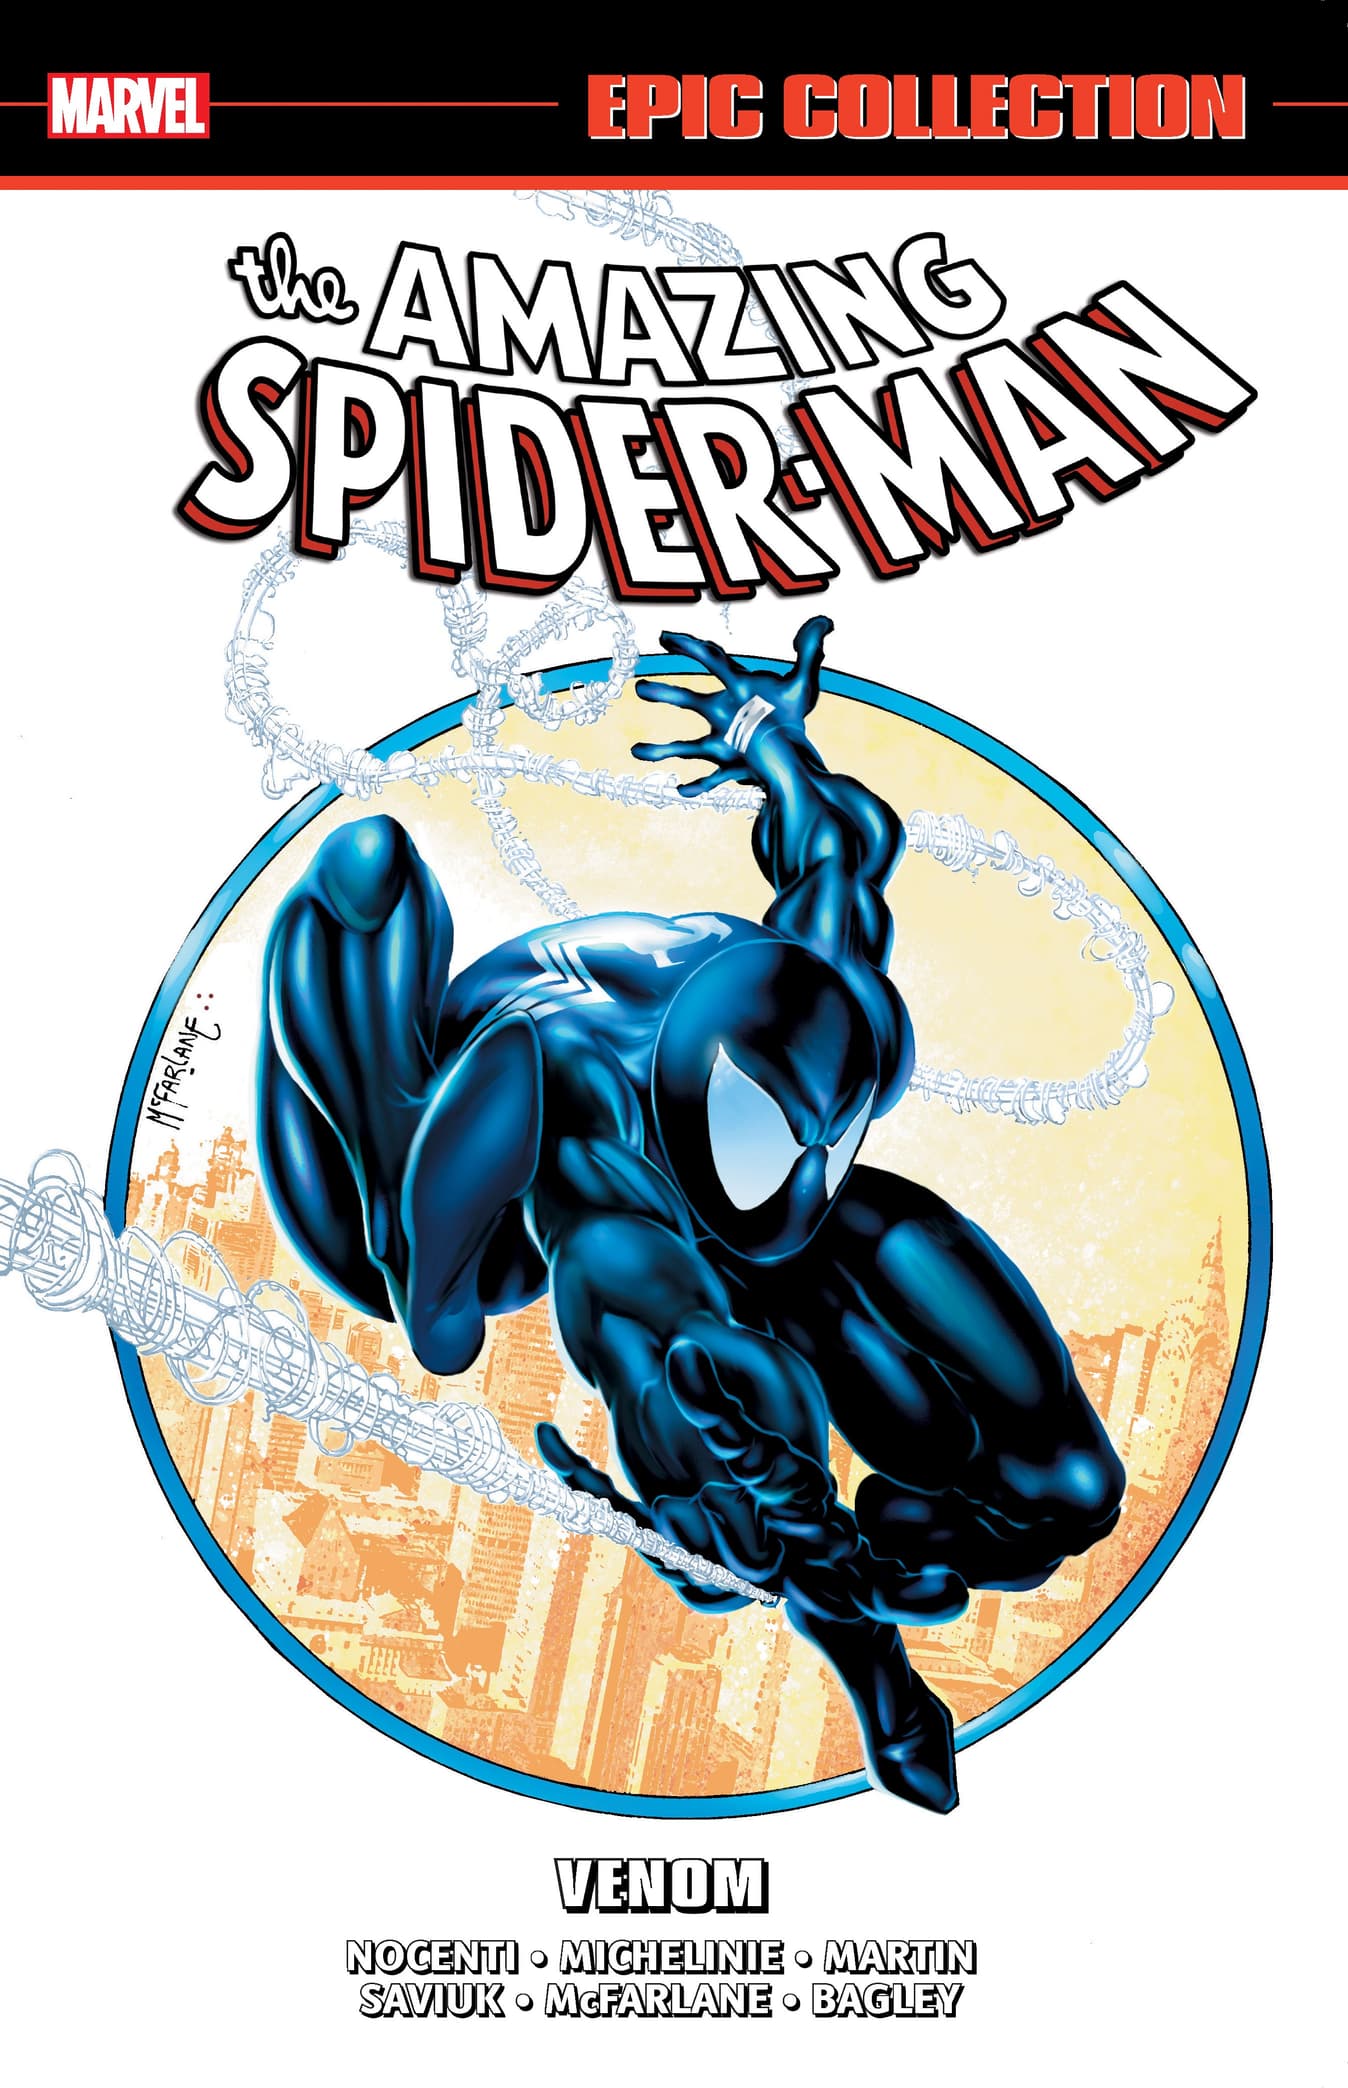 Cover to AMAZING SPIDER-MAN EPIC COLLECTION: VENOM.